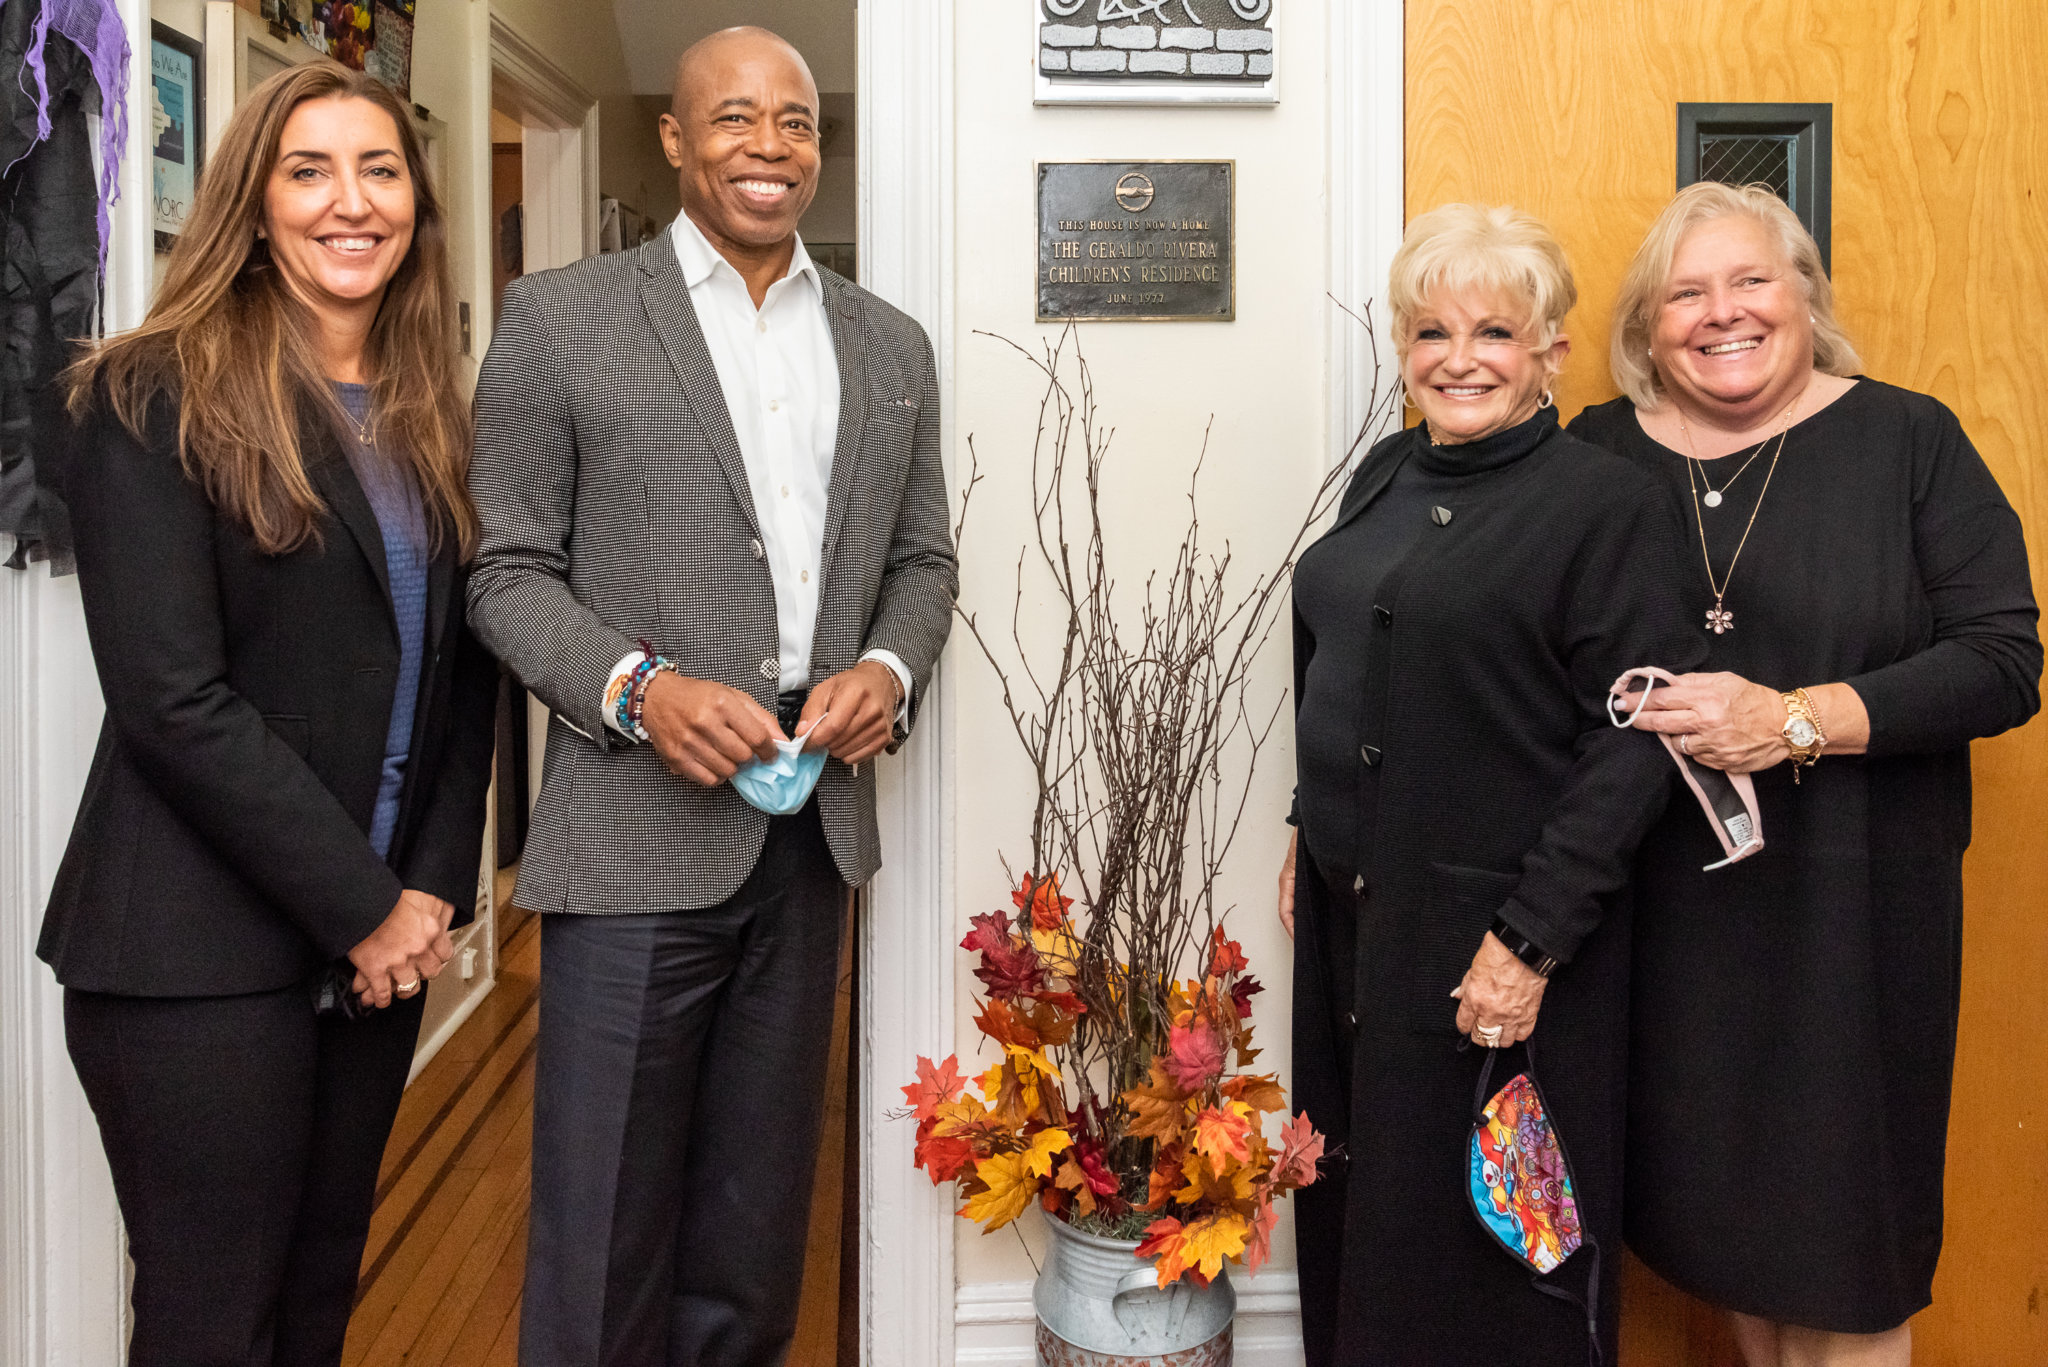 Eric and I with Lynne Koufakis (r.) and Janet Koch (l.). in front of the Geraldo Rivera plaque, which was placed there in 1977. Janet Koch, Vicki Schneps, and Lynne Koufakis pose for a photo with Democratic mayoral candidate Eric Adams